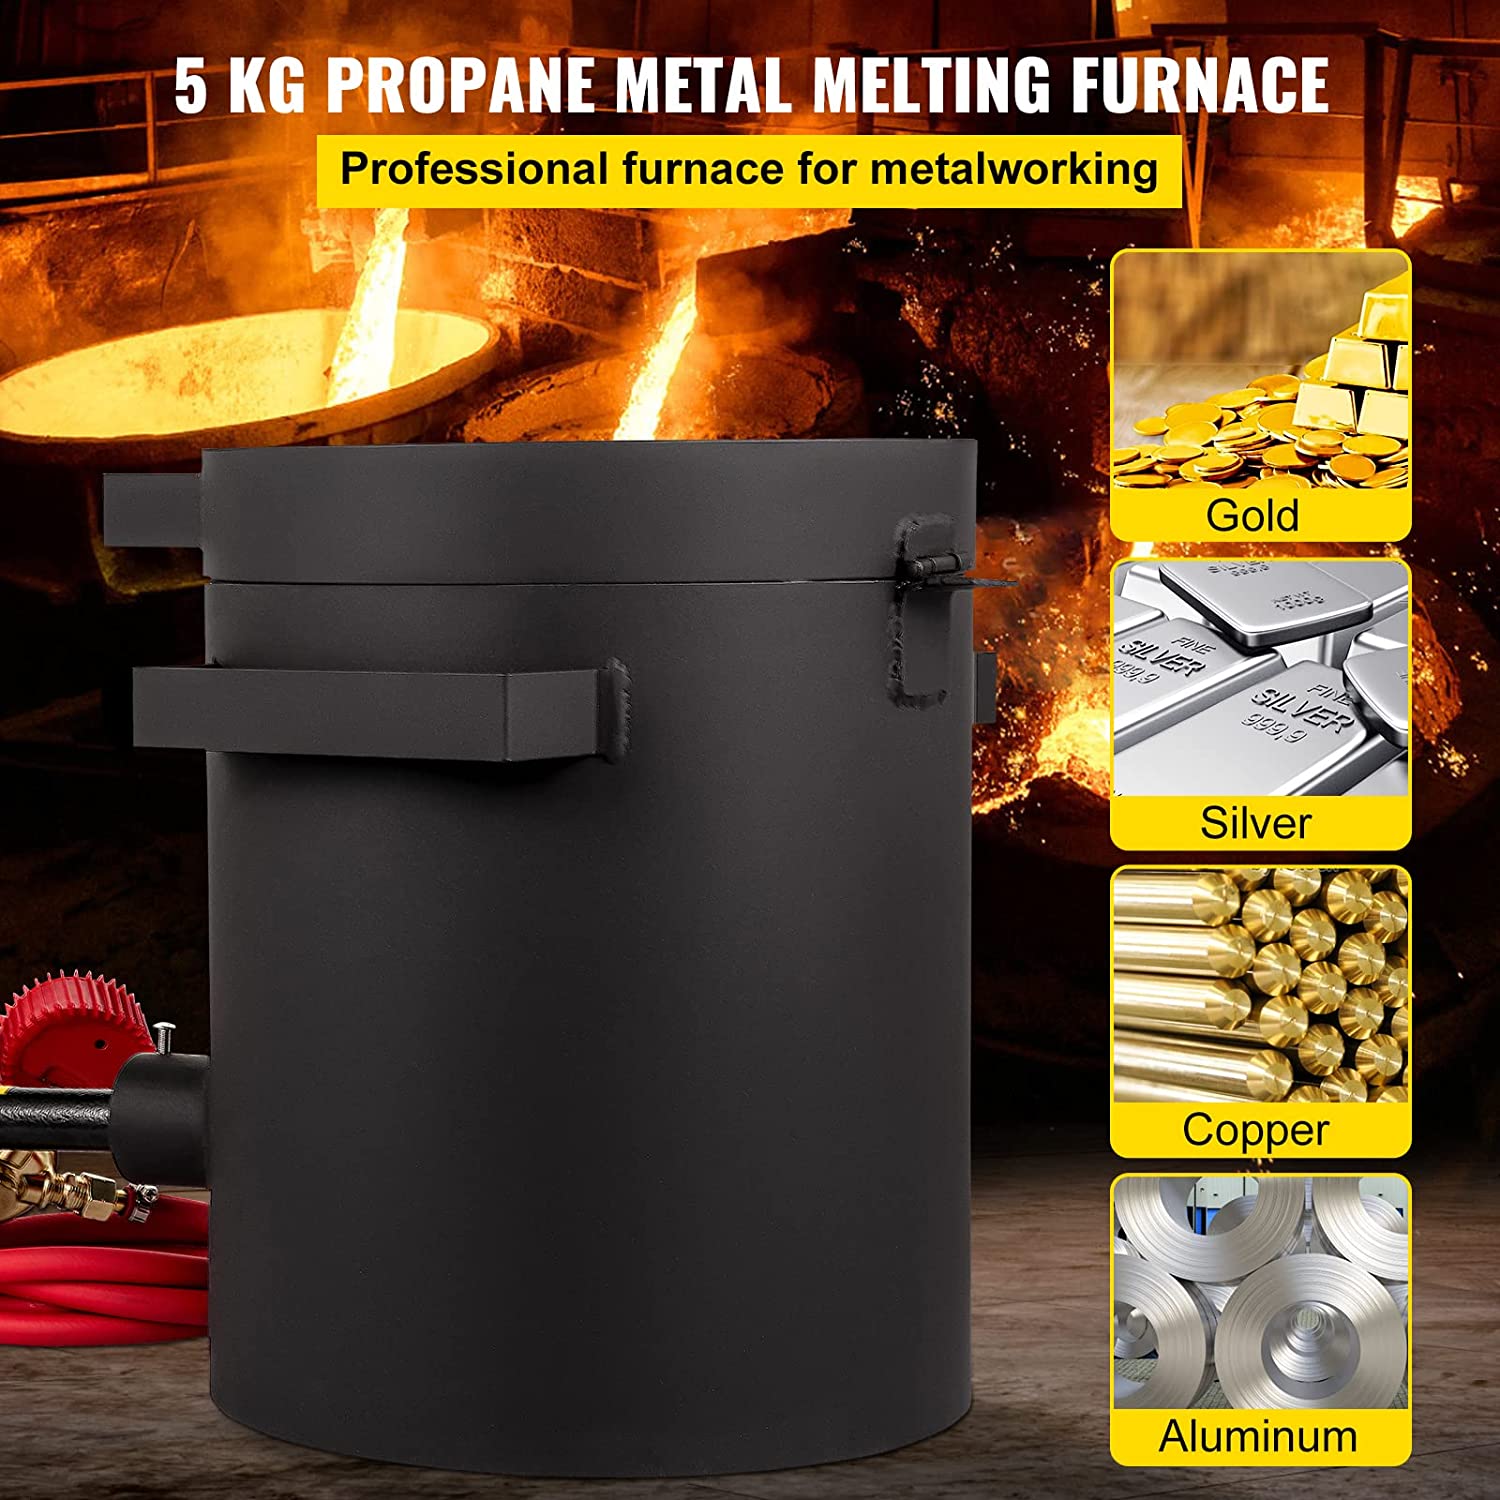 VEVOR Propane Melting Furnace 6KG, 2462°F Metal Foundry Furnace Kit – Graphite Crucible and Tongs, Casting Melting Smelting Refining Precious Metals Like Gold Silver Aluminum Copper Brass Bronze